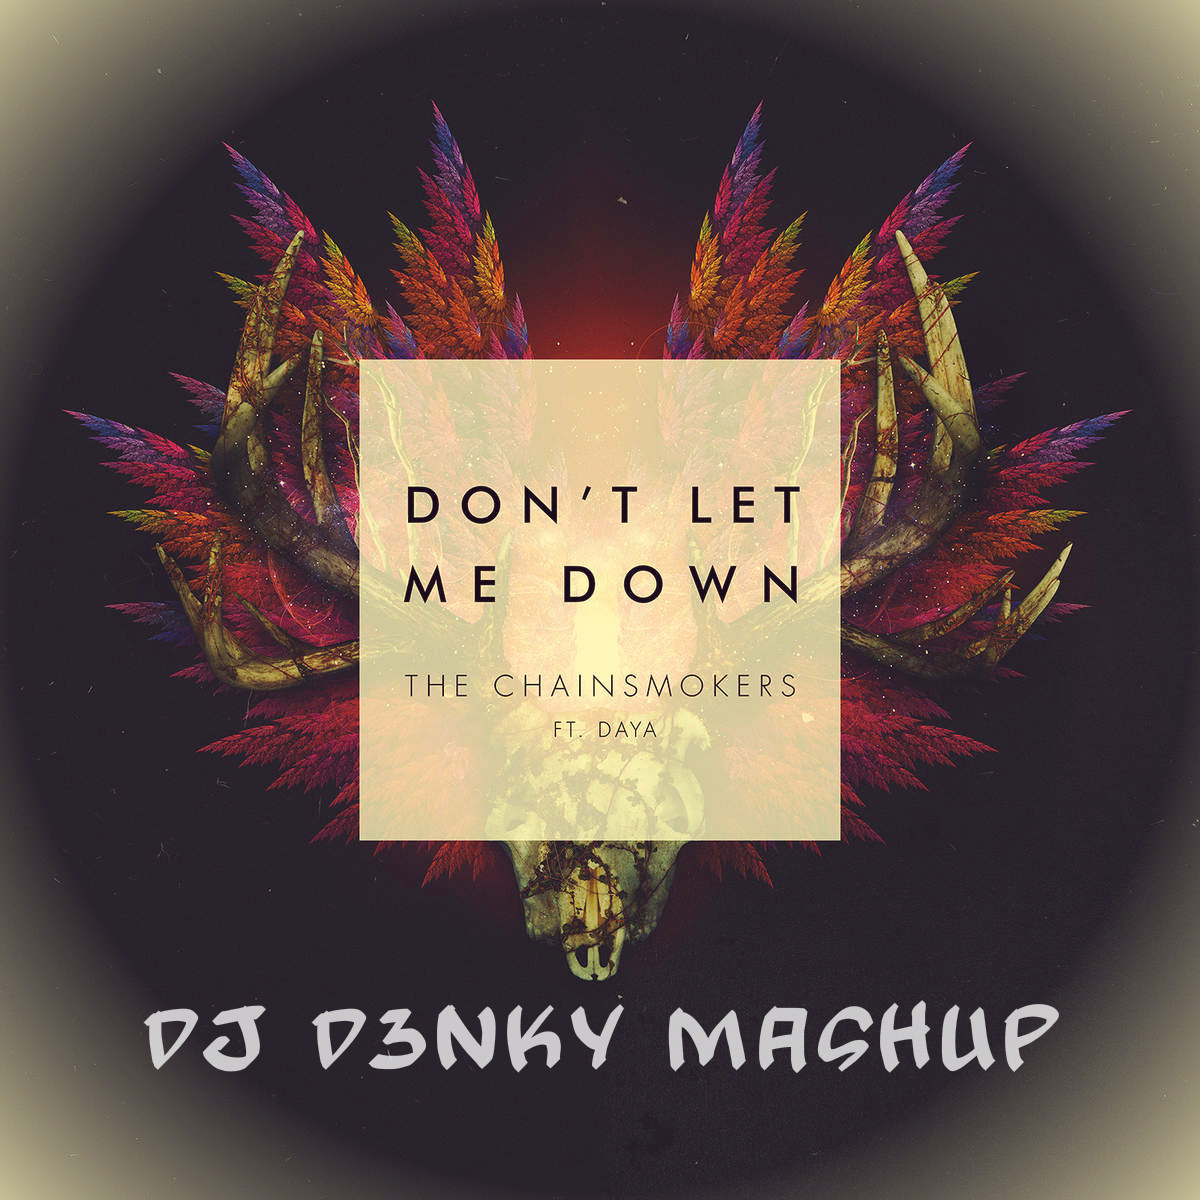 Daya don't Let me down. The Chainsmokers feat Cheyenne Giles - make me feel. The Chainsmokers feat Cheyenne Giles - make me feel Cover 1000x1000. The chainsmokers feat daya